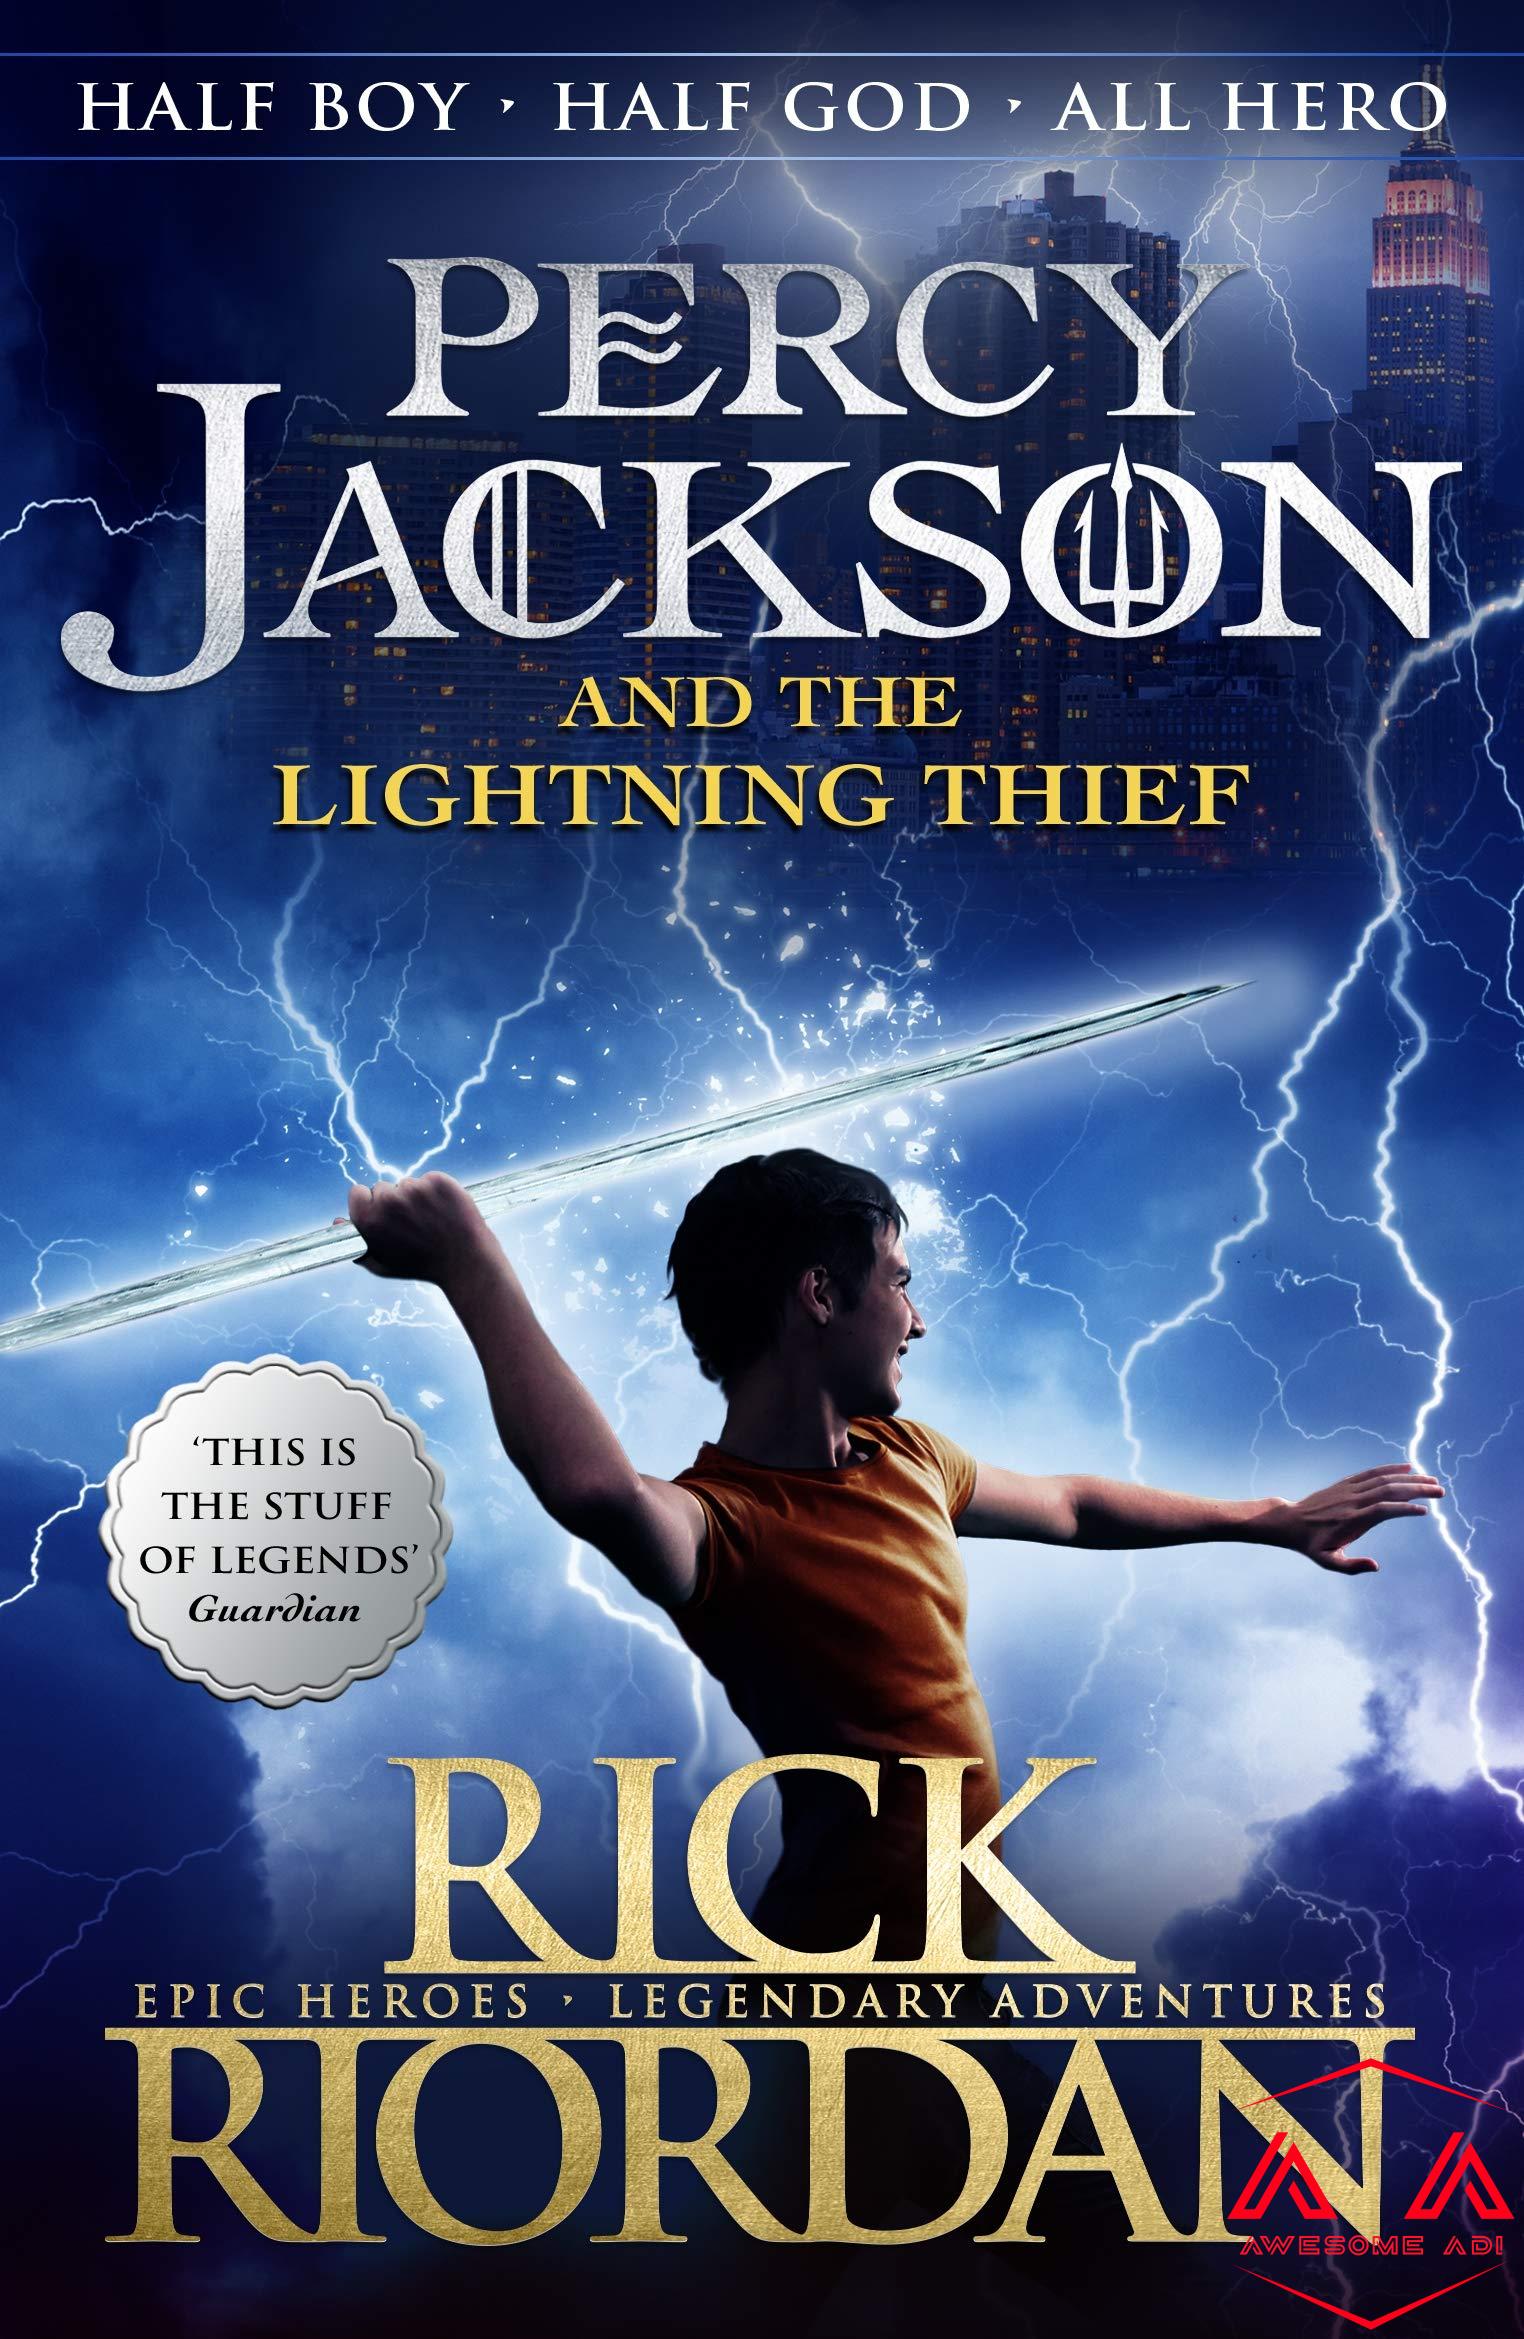 book review percy jackson and the lightning thief